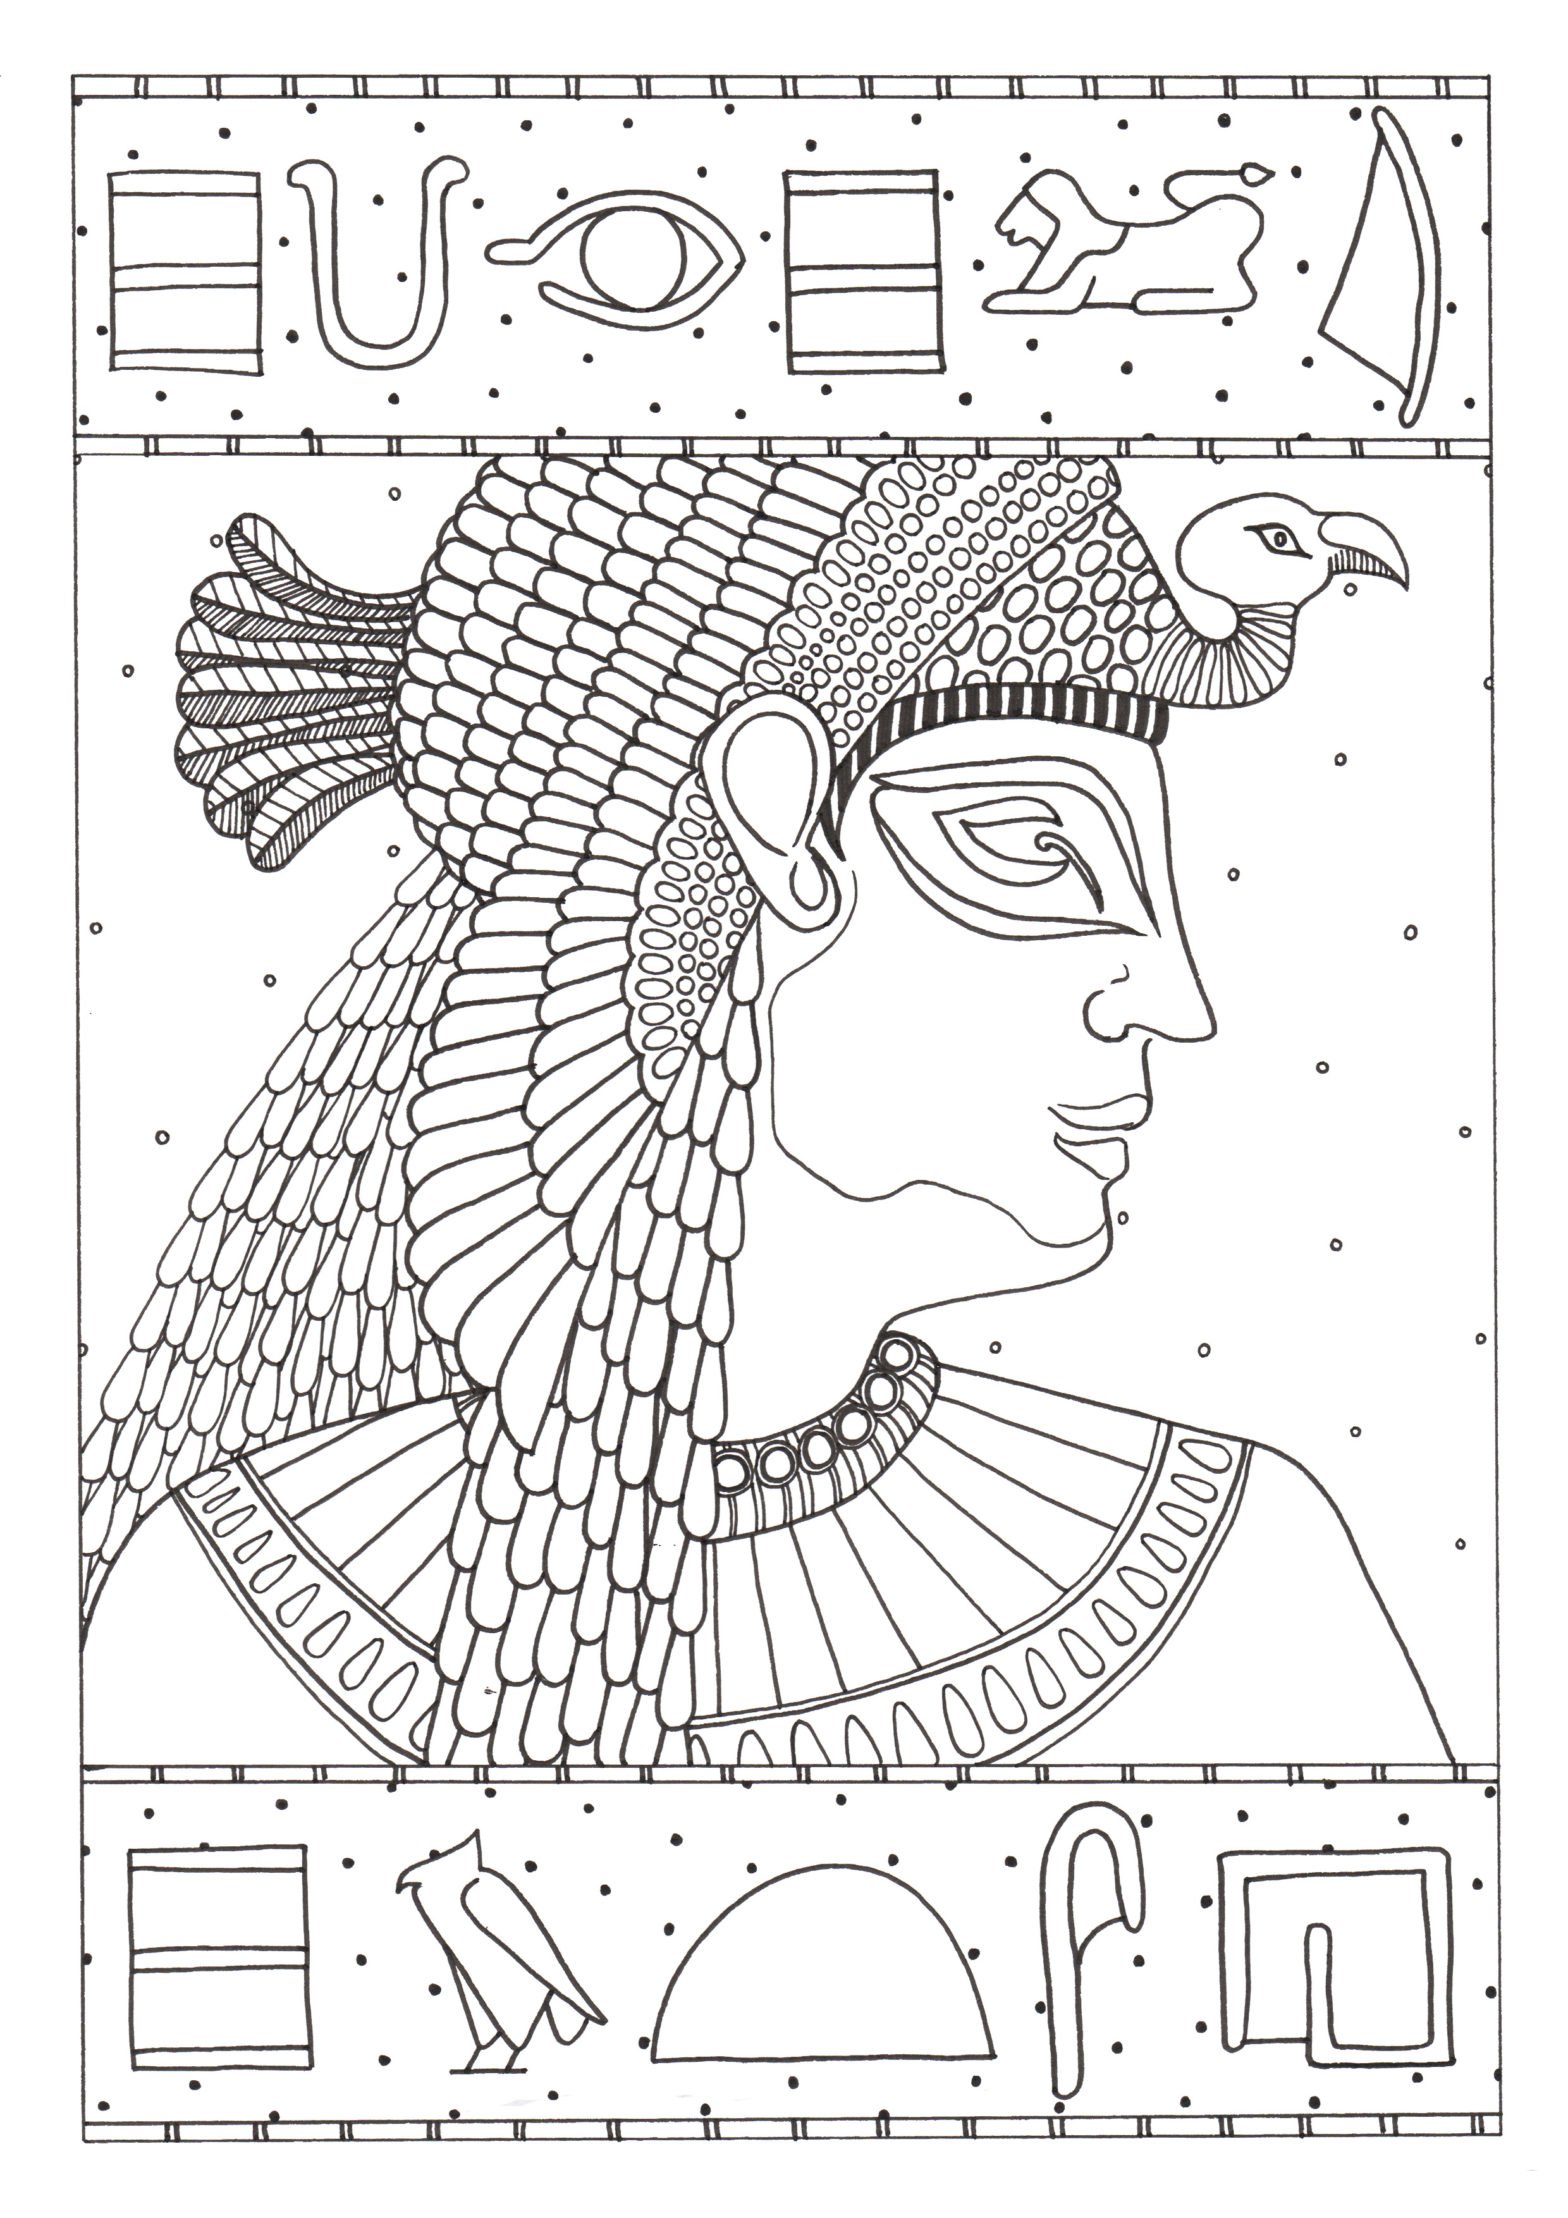 Cleopatra drawing easy